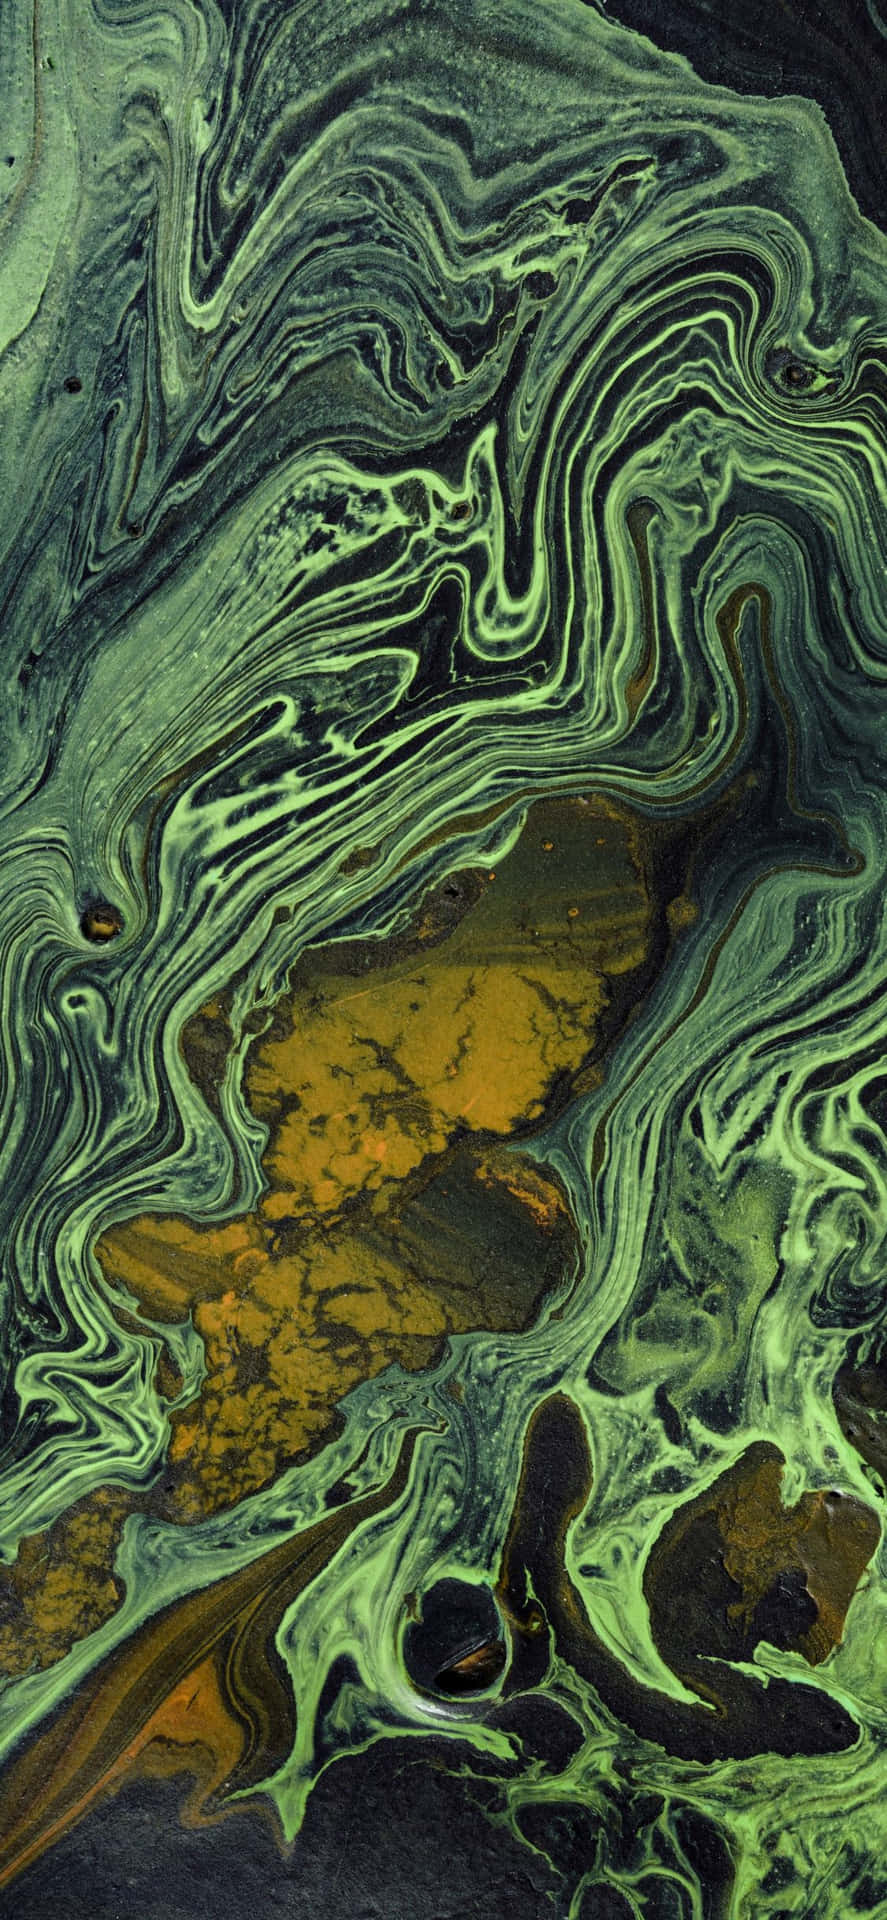 Aesthetic Marble Texture for iPhone X Background